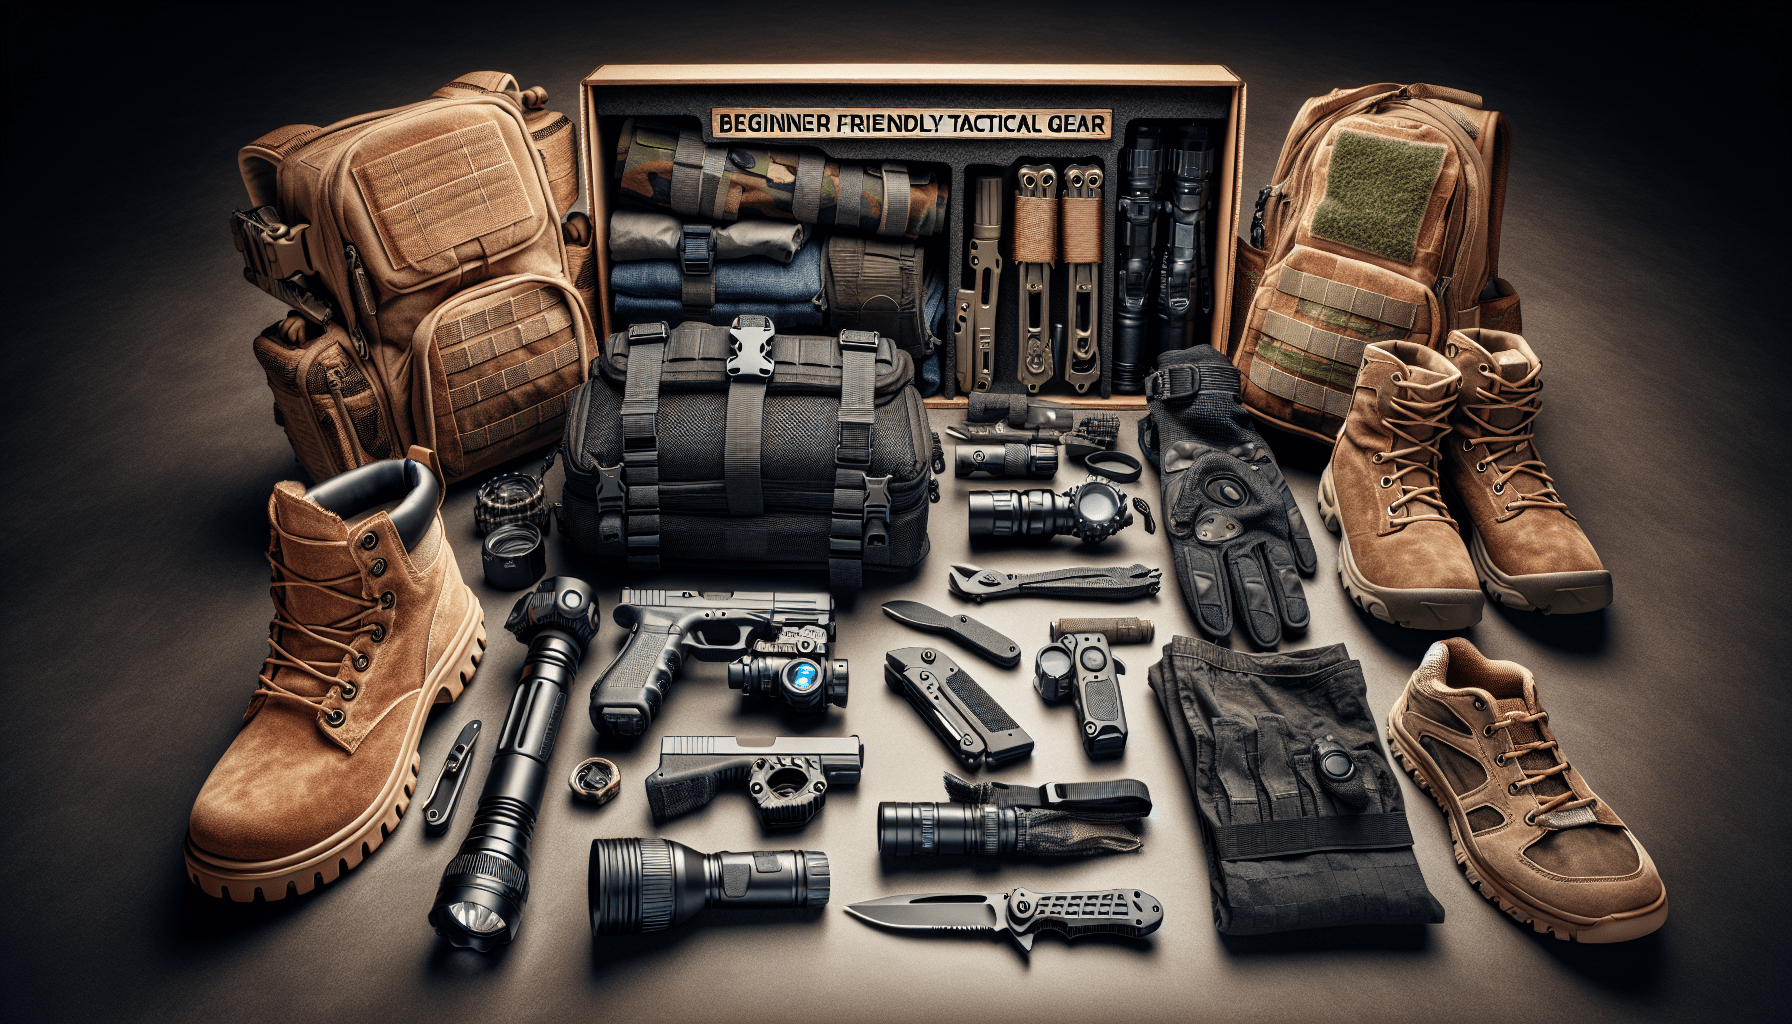 What Tactical Gear To Buy First?